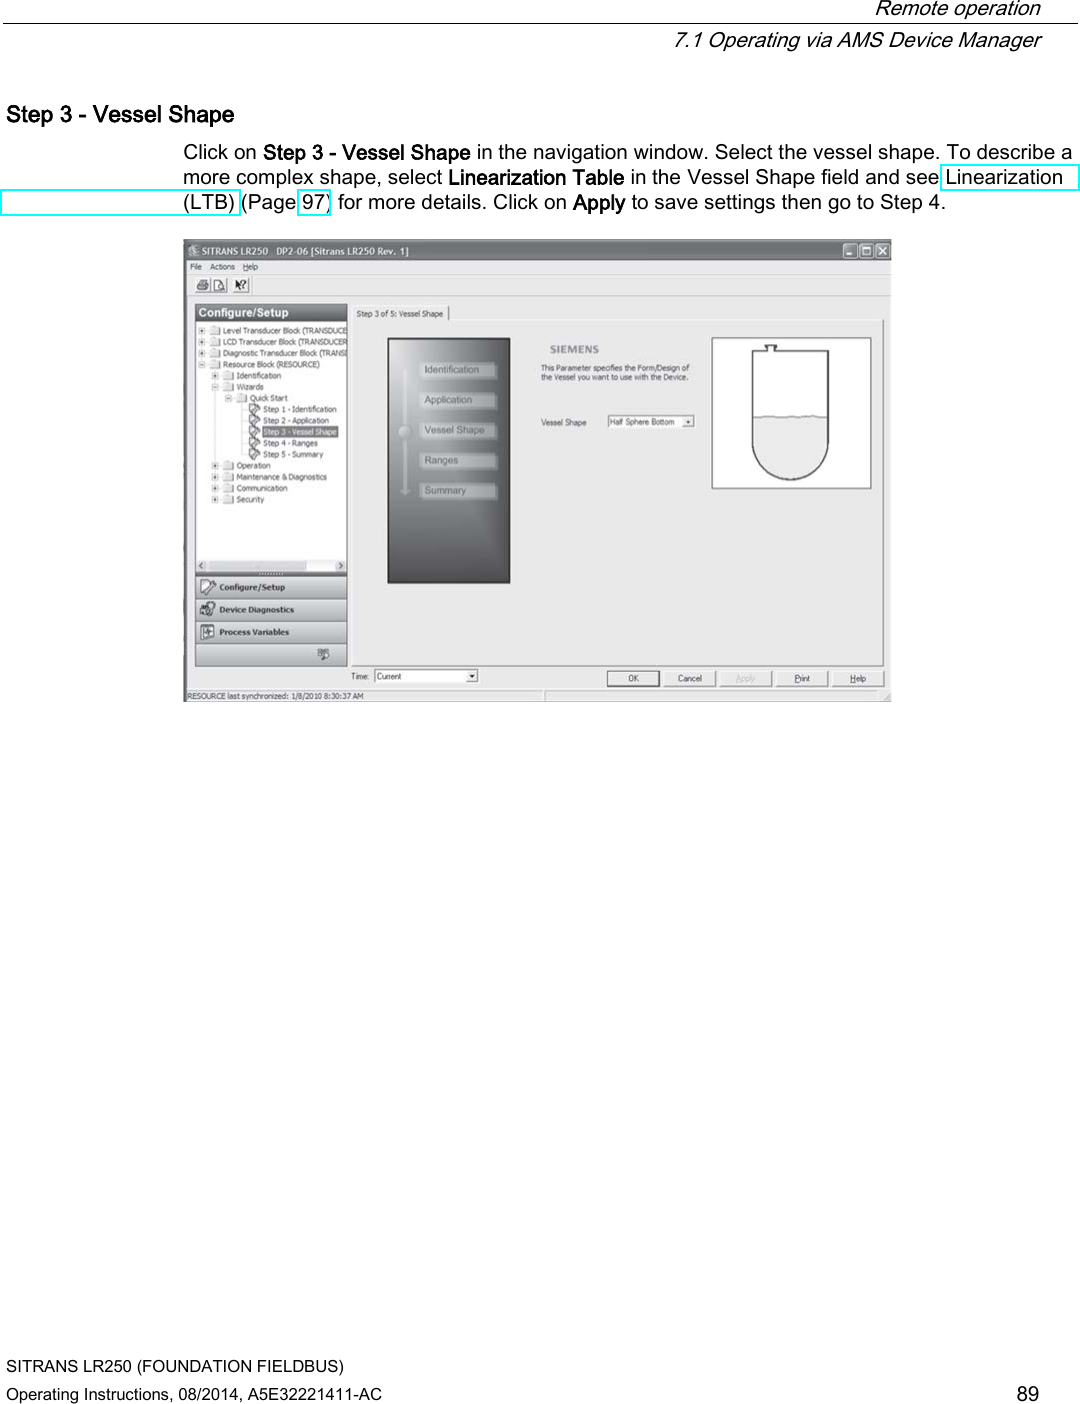  Remote operation  7.1 Operating via AMS Device Manager SITRANS LR250 (FOUNDATION FIELDBUS) Operating Instructions, 08/2014, A5E32221411-AC 89 Step 3 - Vessel Shape Click on Step 3 - Vessel Shape in the navigation window. Select the vessel shape. To describe a more complex shape, select Linearization Table in the Vessel Shape field and see Linearization (LTB) (Page 97) for more details. Click on Apply to save settings then go to Step 4.  